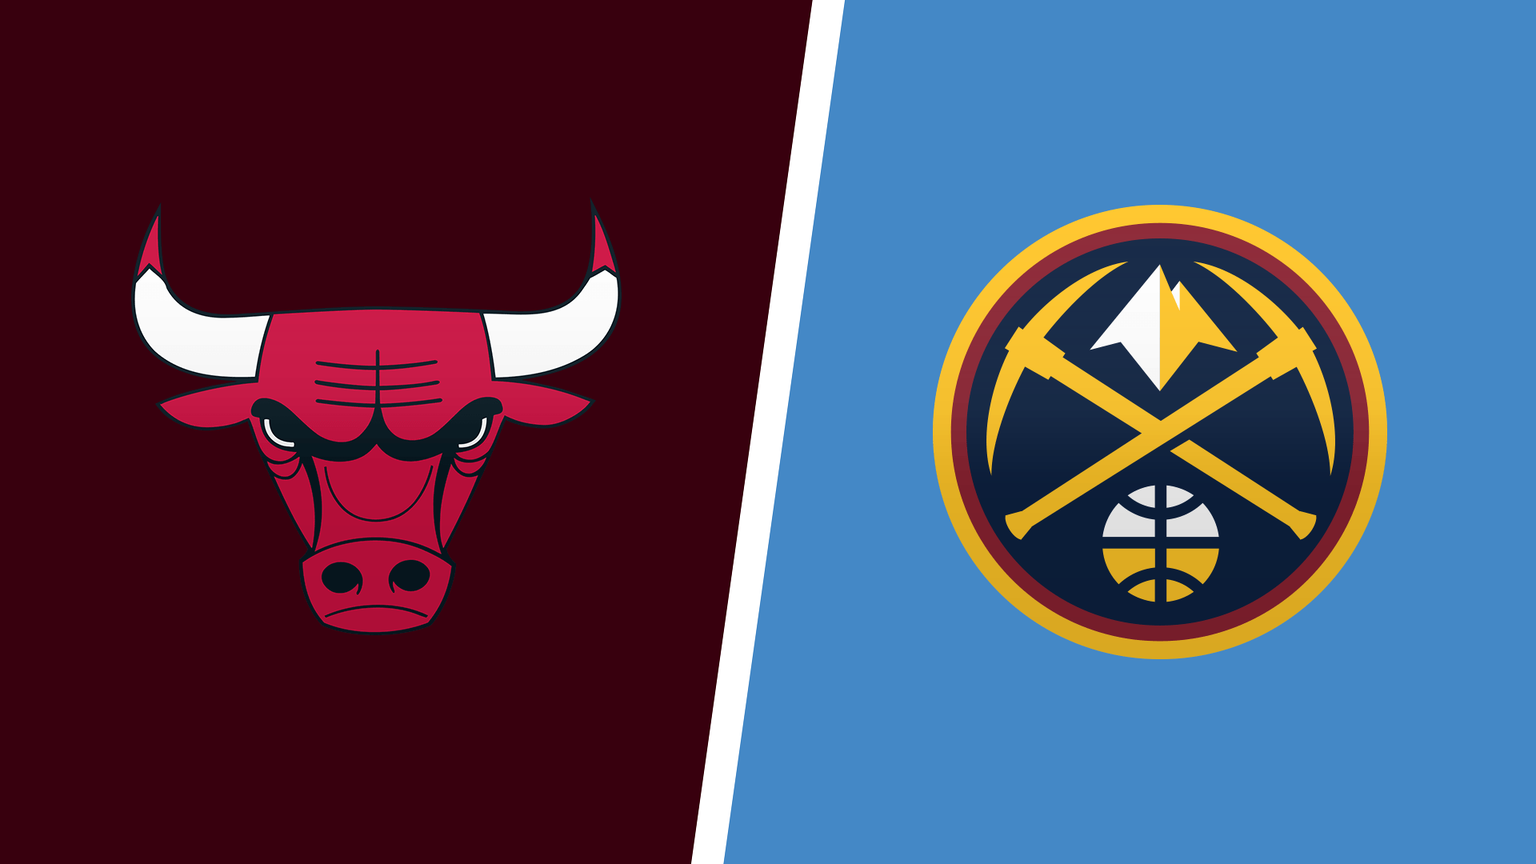 How to Watch Chicago Bulls vs. Denver Nuggets Live Online on October 7